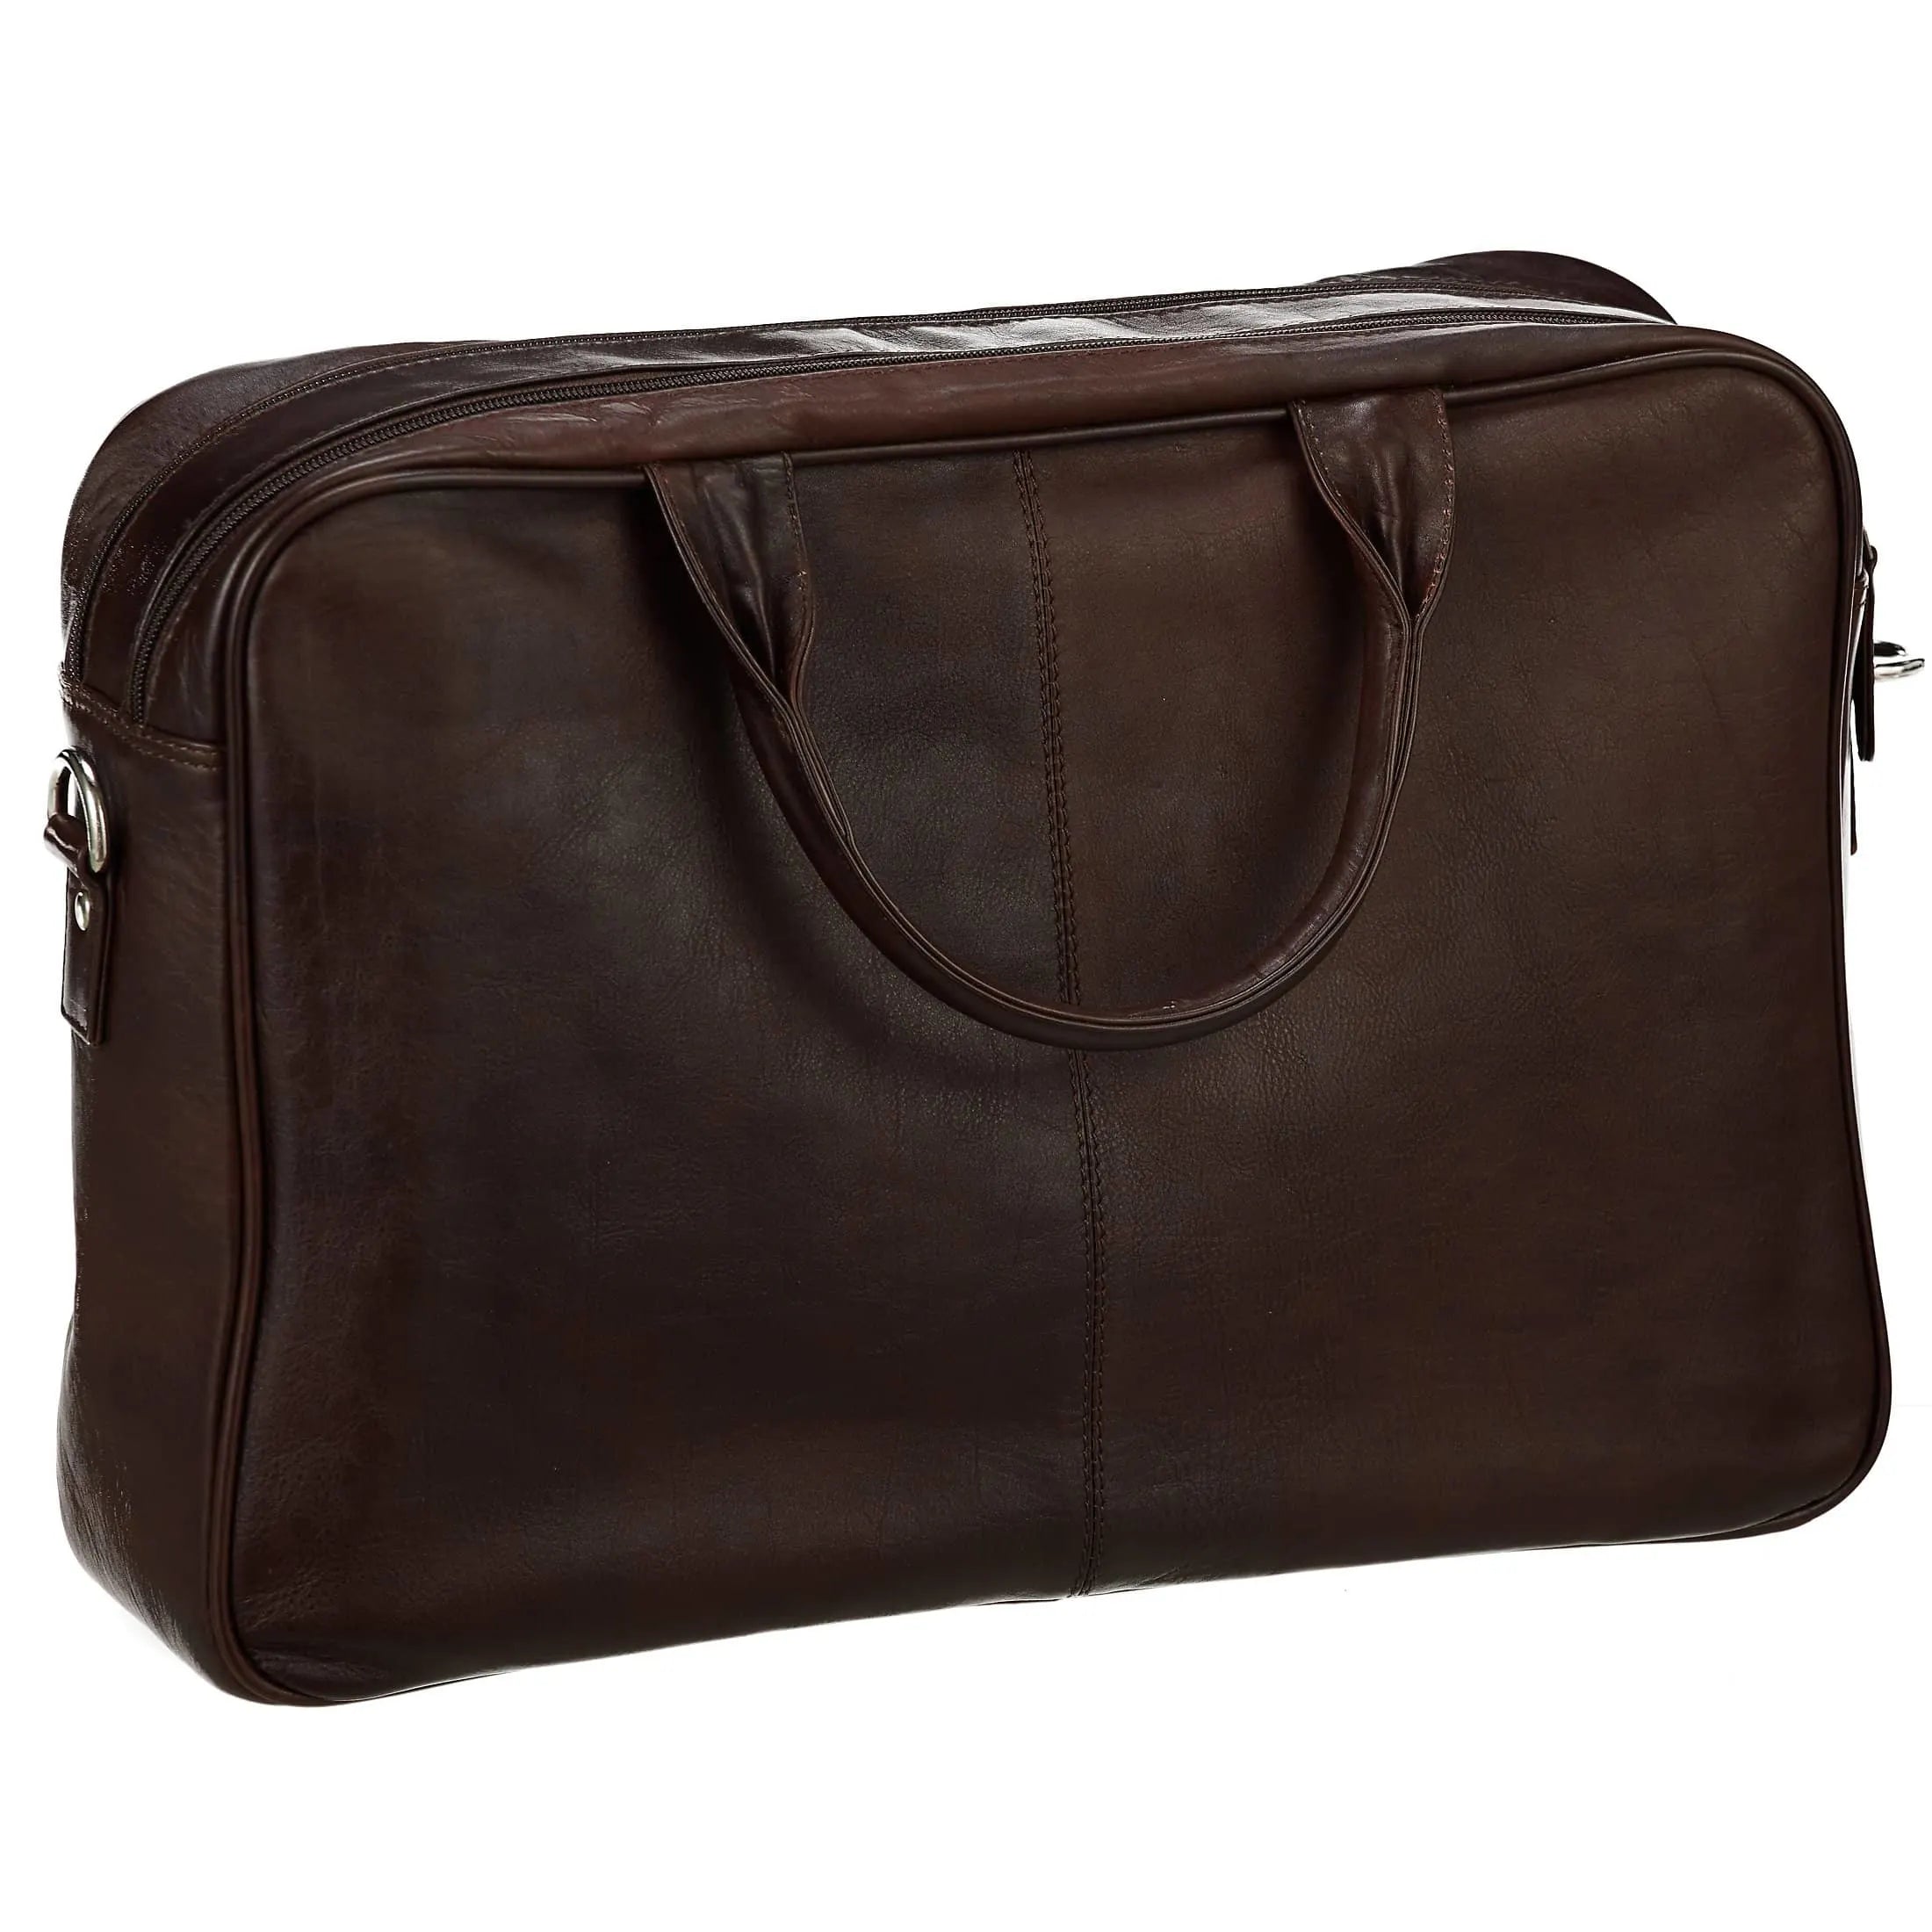 Dermata Business briefcase with laptop compartment 41 cm - Brown